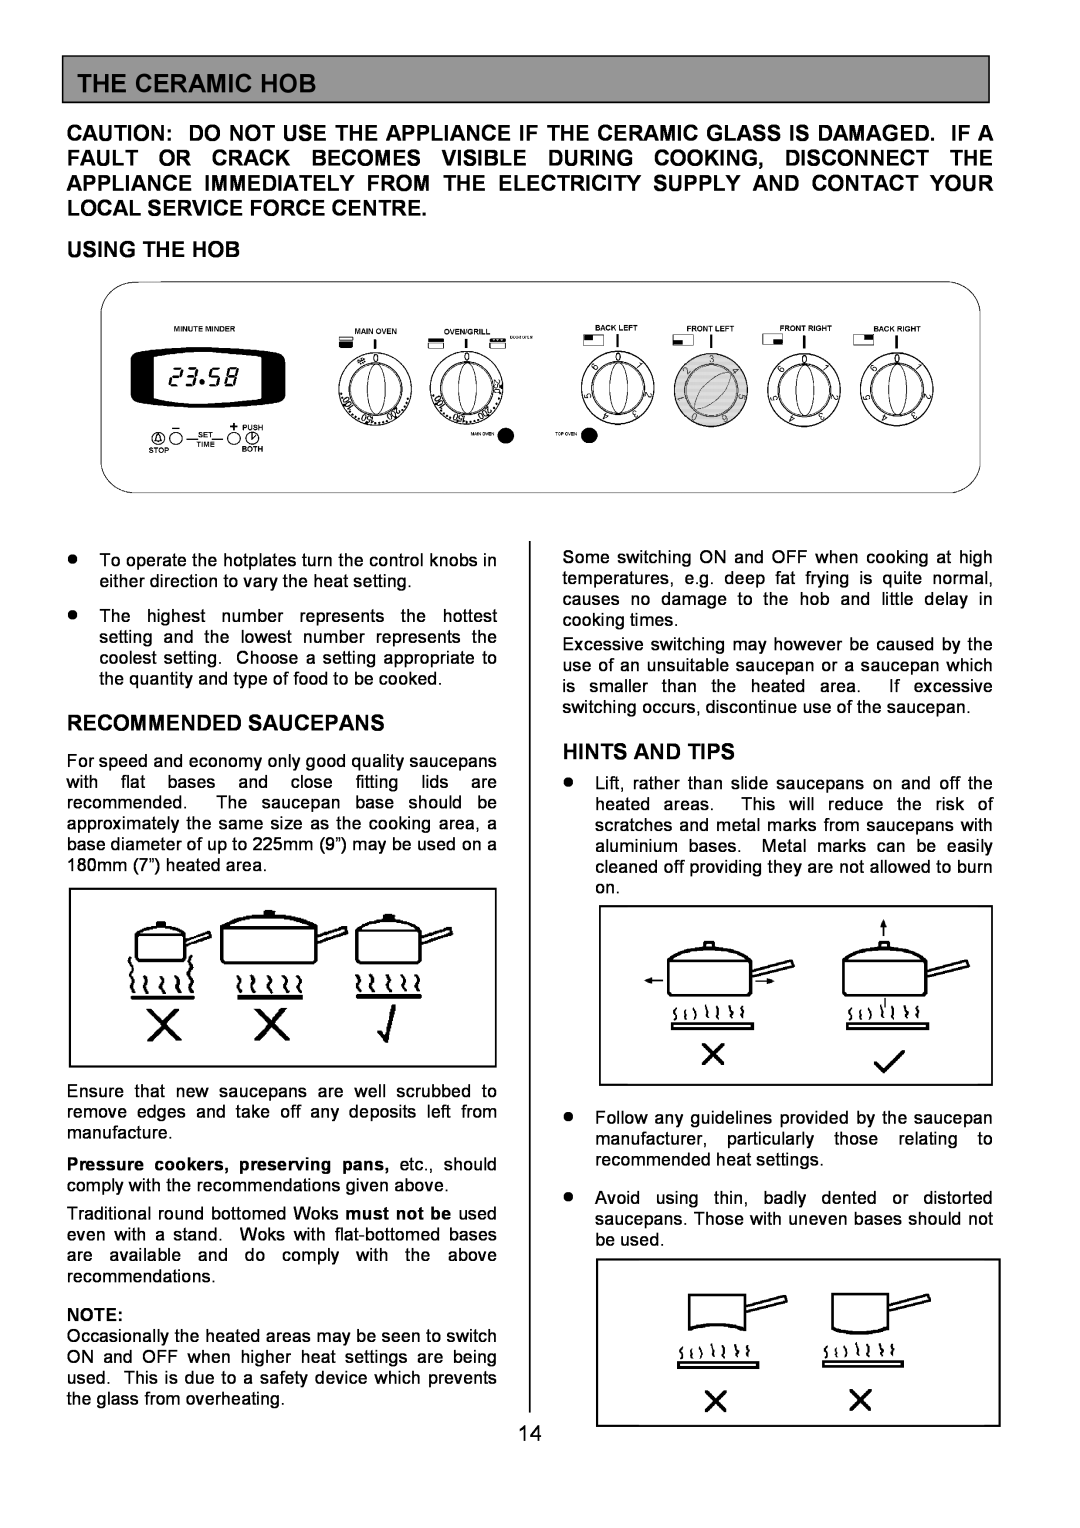 Tricity Bendix CSIE501 installation instructions The Ceramic Hob, Using The Hob, Recommended Saucepans, Hints And Tips 